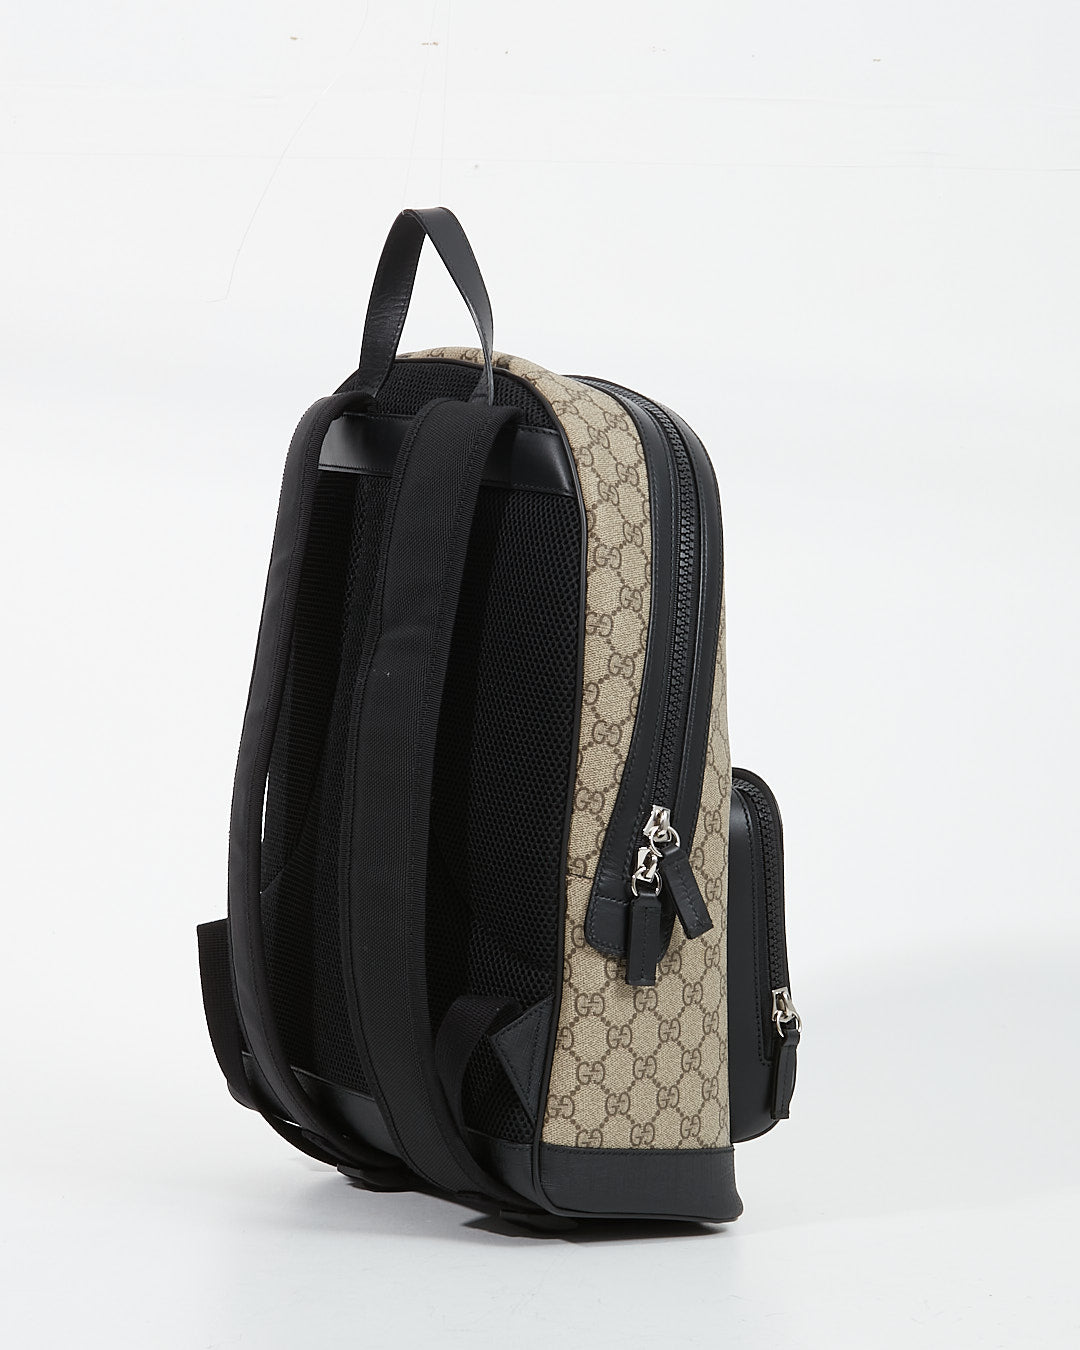 Gucci GG Supreme Canvas/Leather Medium Backpack